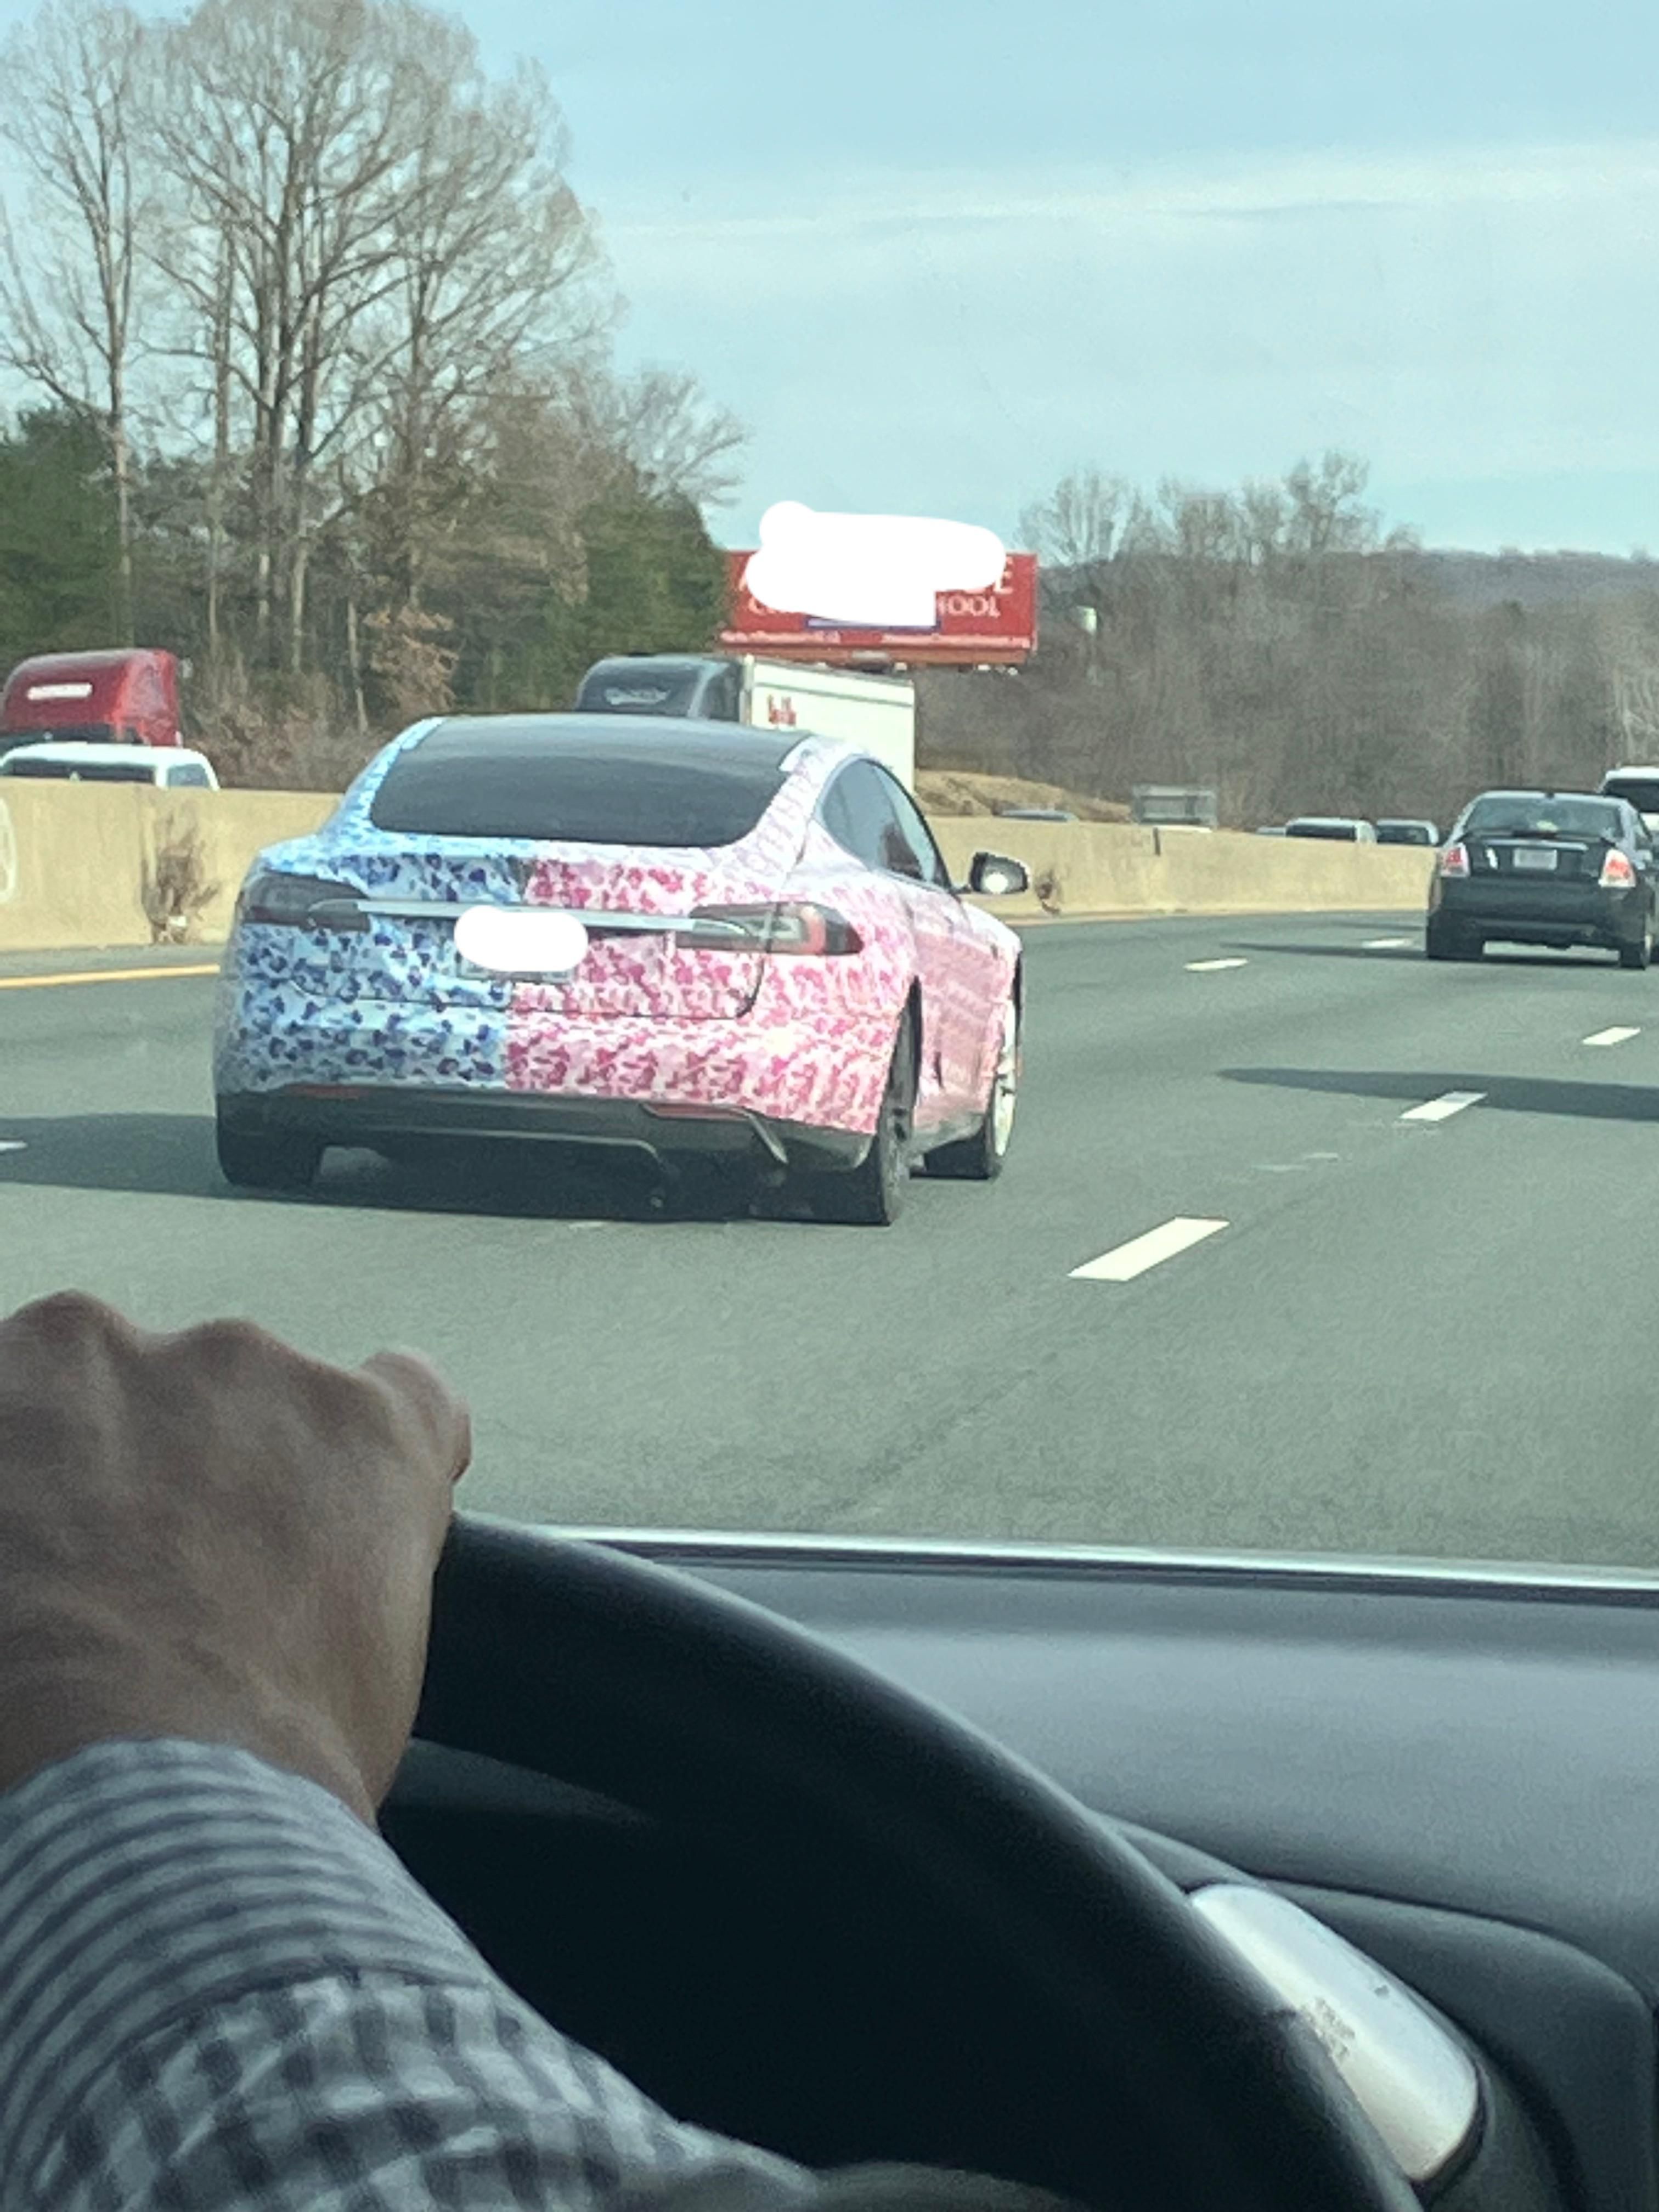 "ight, give me the ugliest car you got"